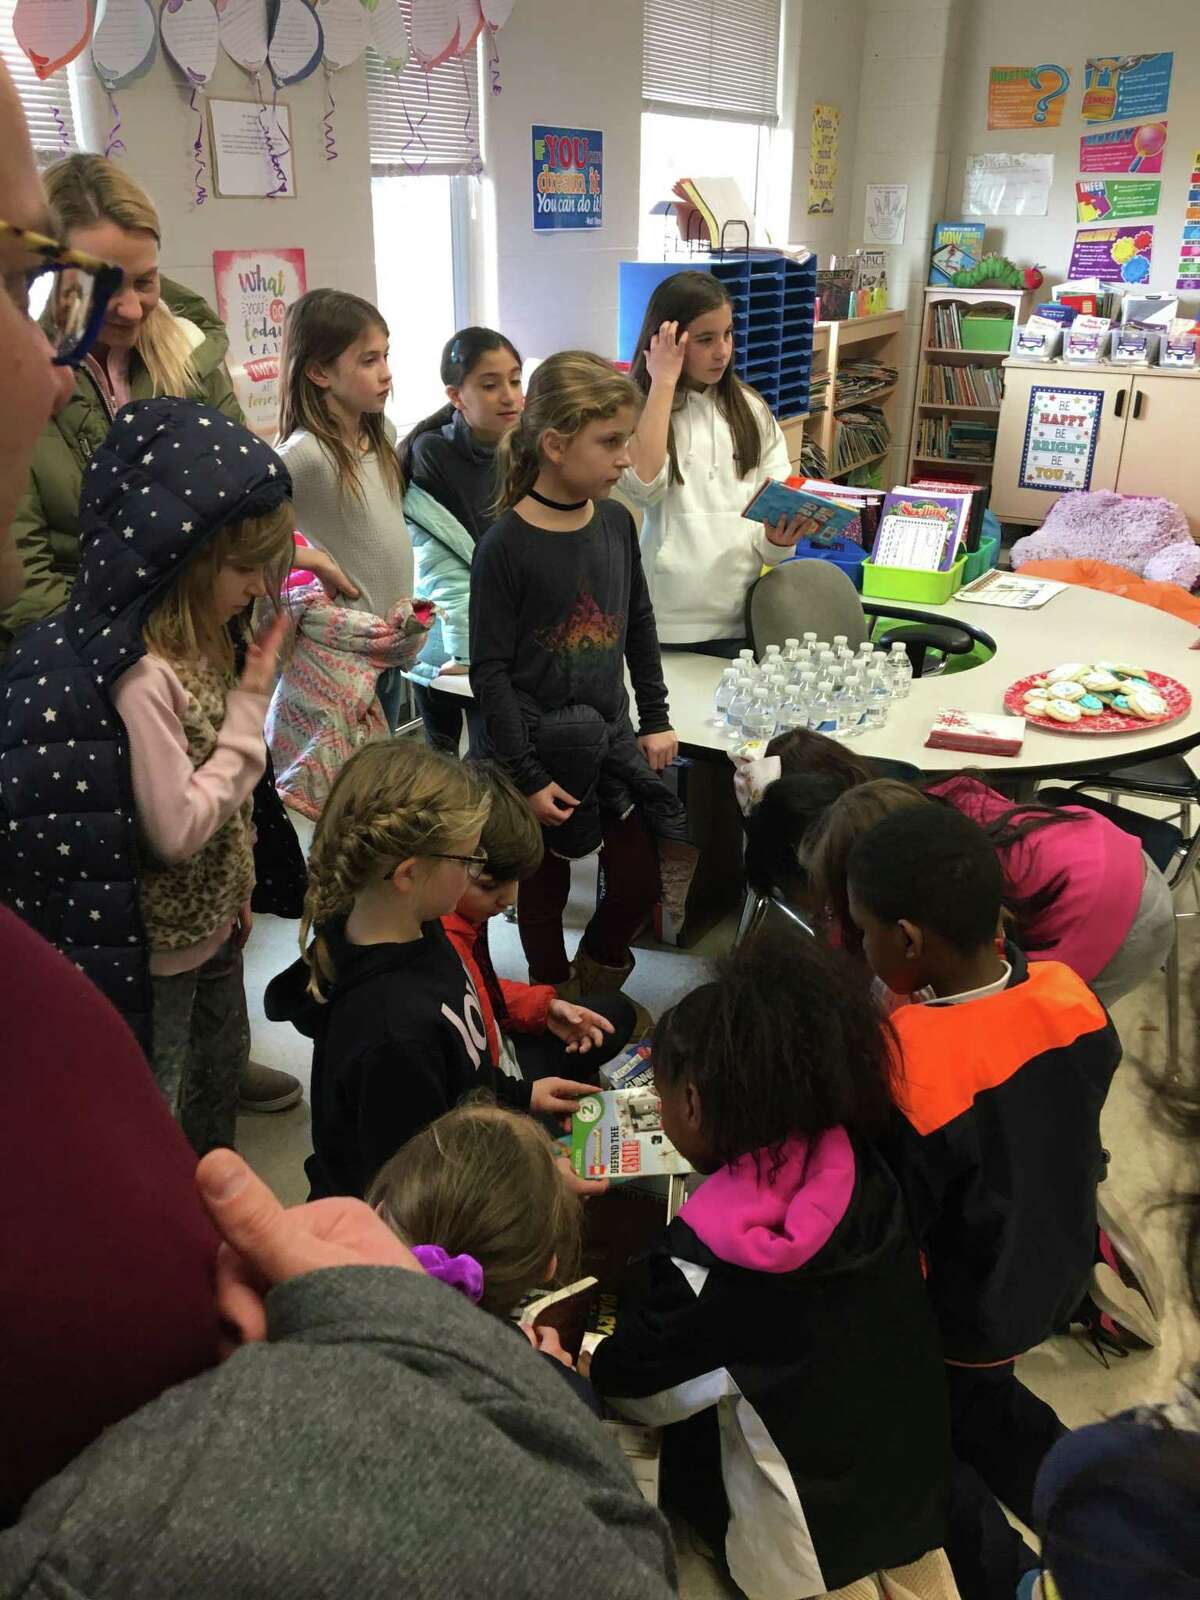 South School students, families and staff in New Canaan recently came together and packed more than 700 meal bags for the Filling In The Blanks warehouse. The students also supported a Holiday Book Drive for Geraldine W. Johnson School in Bridgeport.